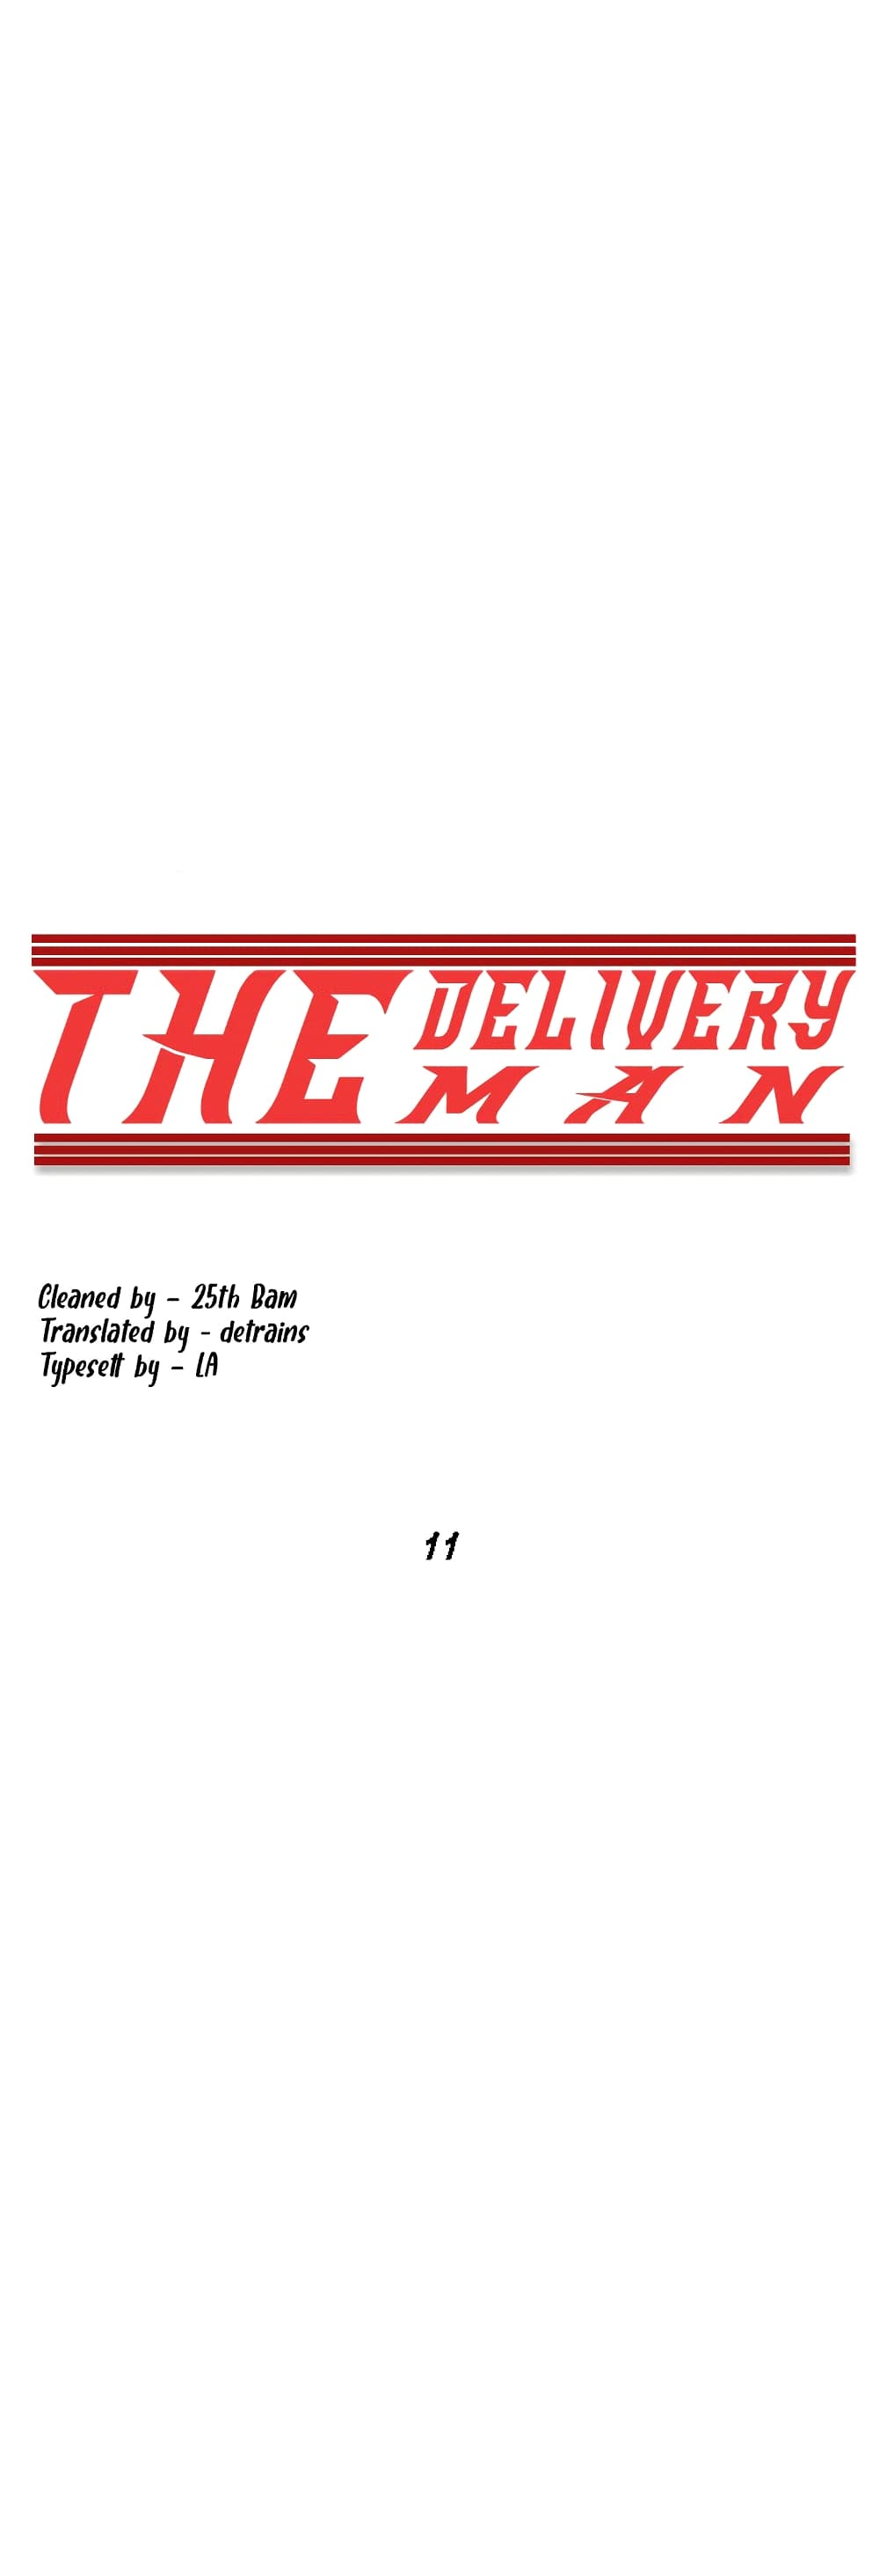 Delivery Man 11-11